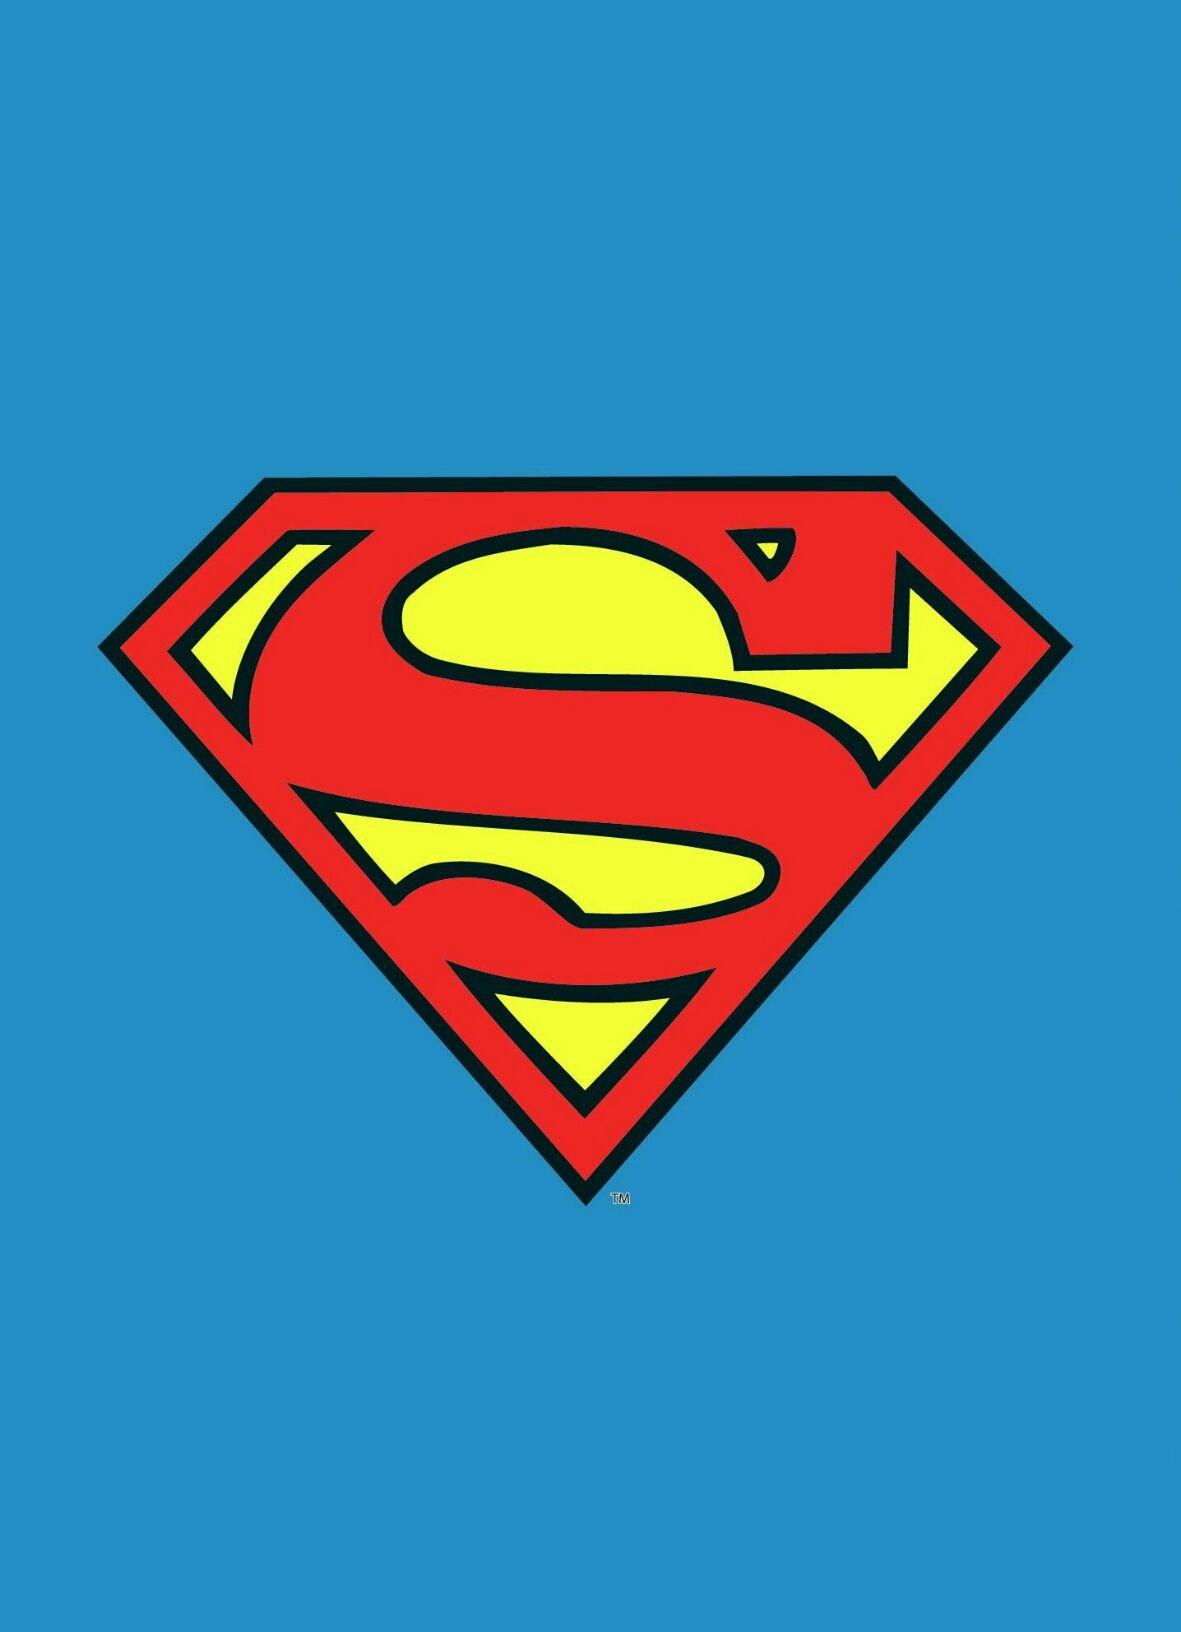 The Letter S image Superman logo HD wallpaper and background photo